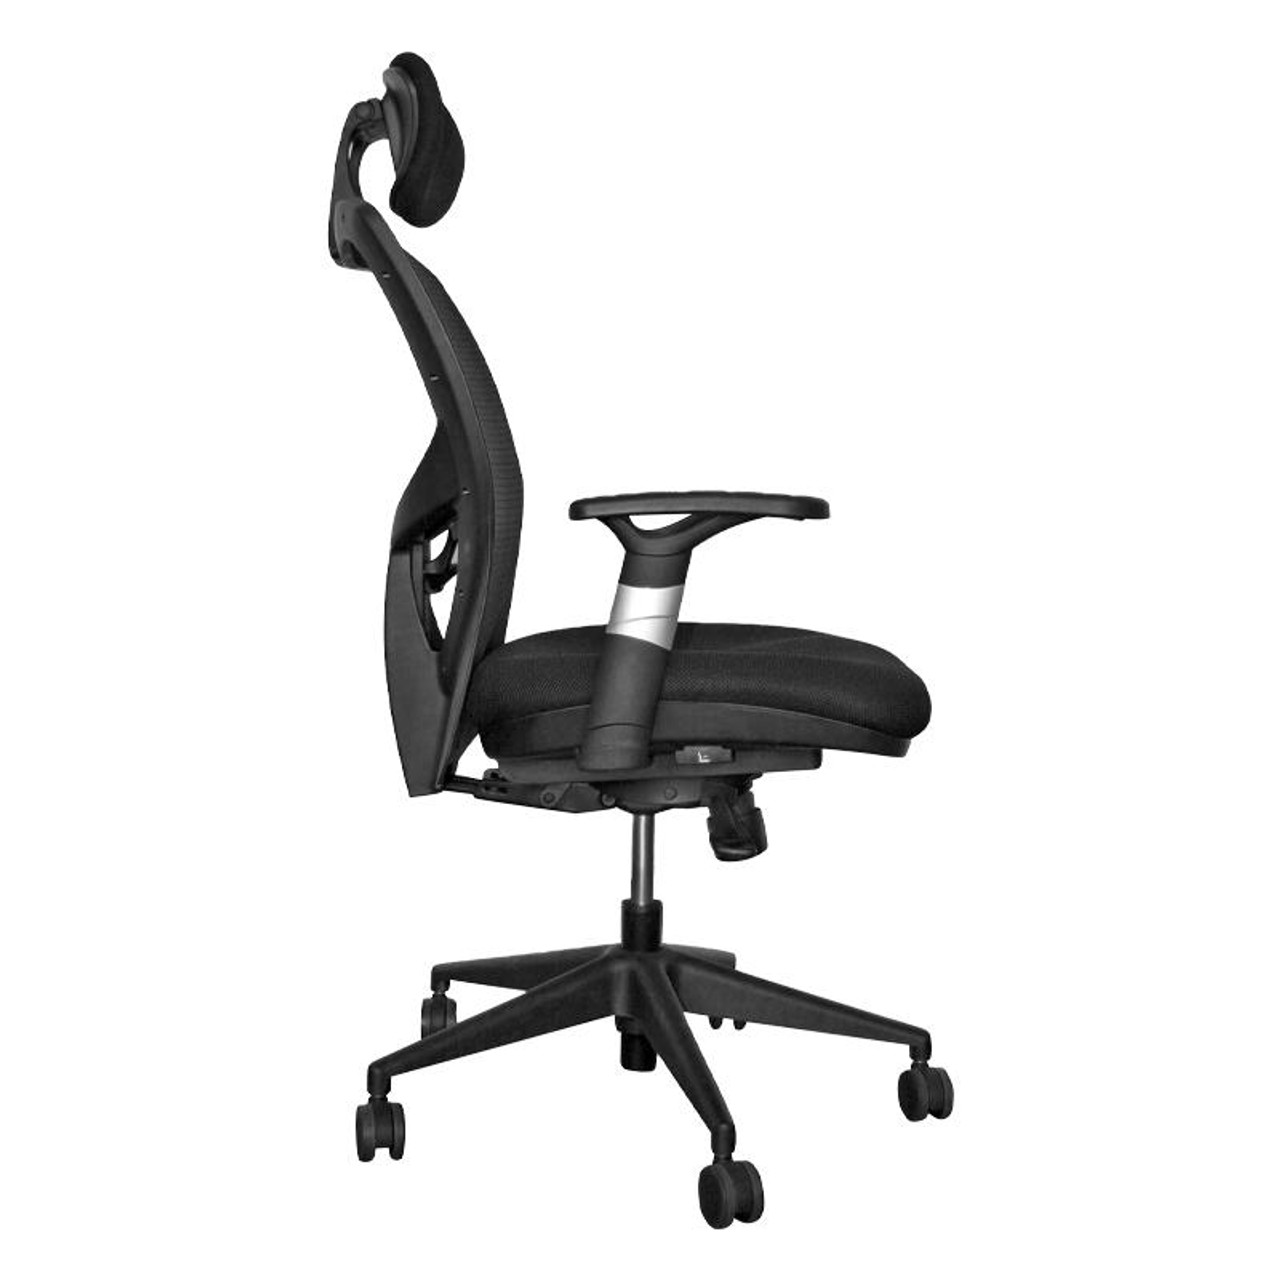 Buy Chair Falcon High-back Office Chair Online